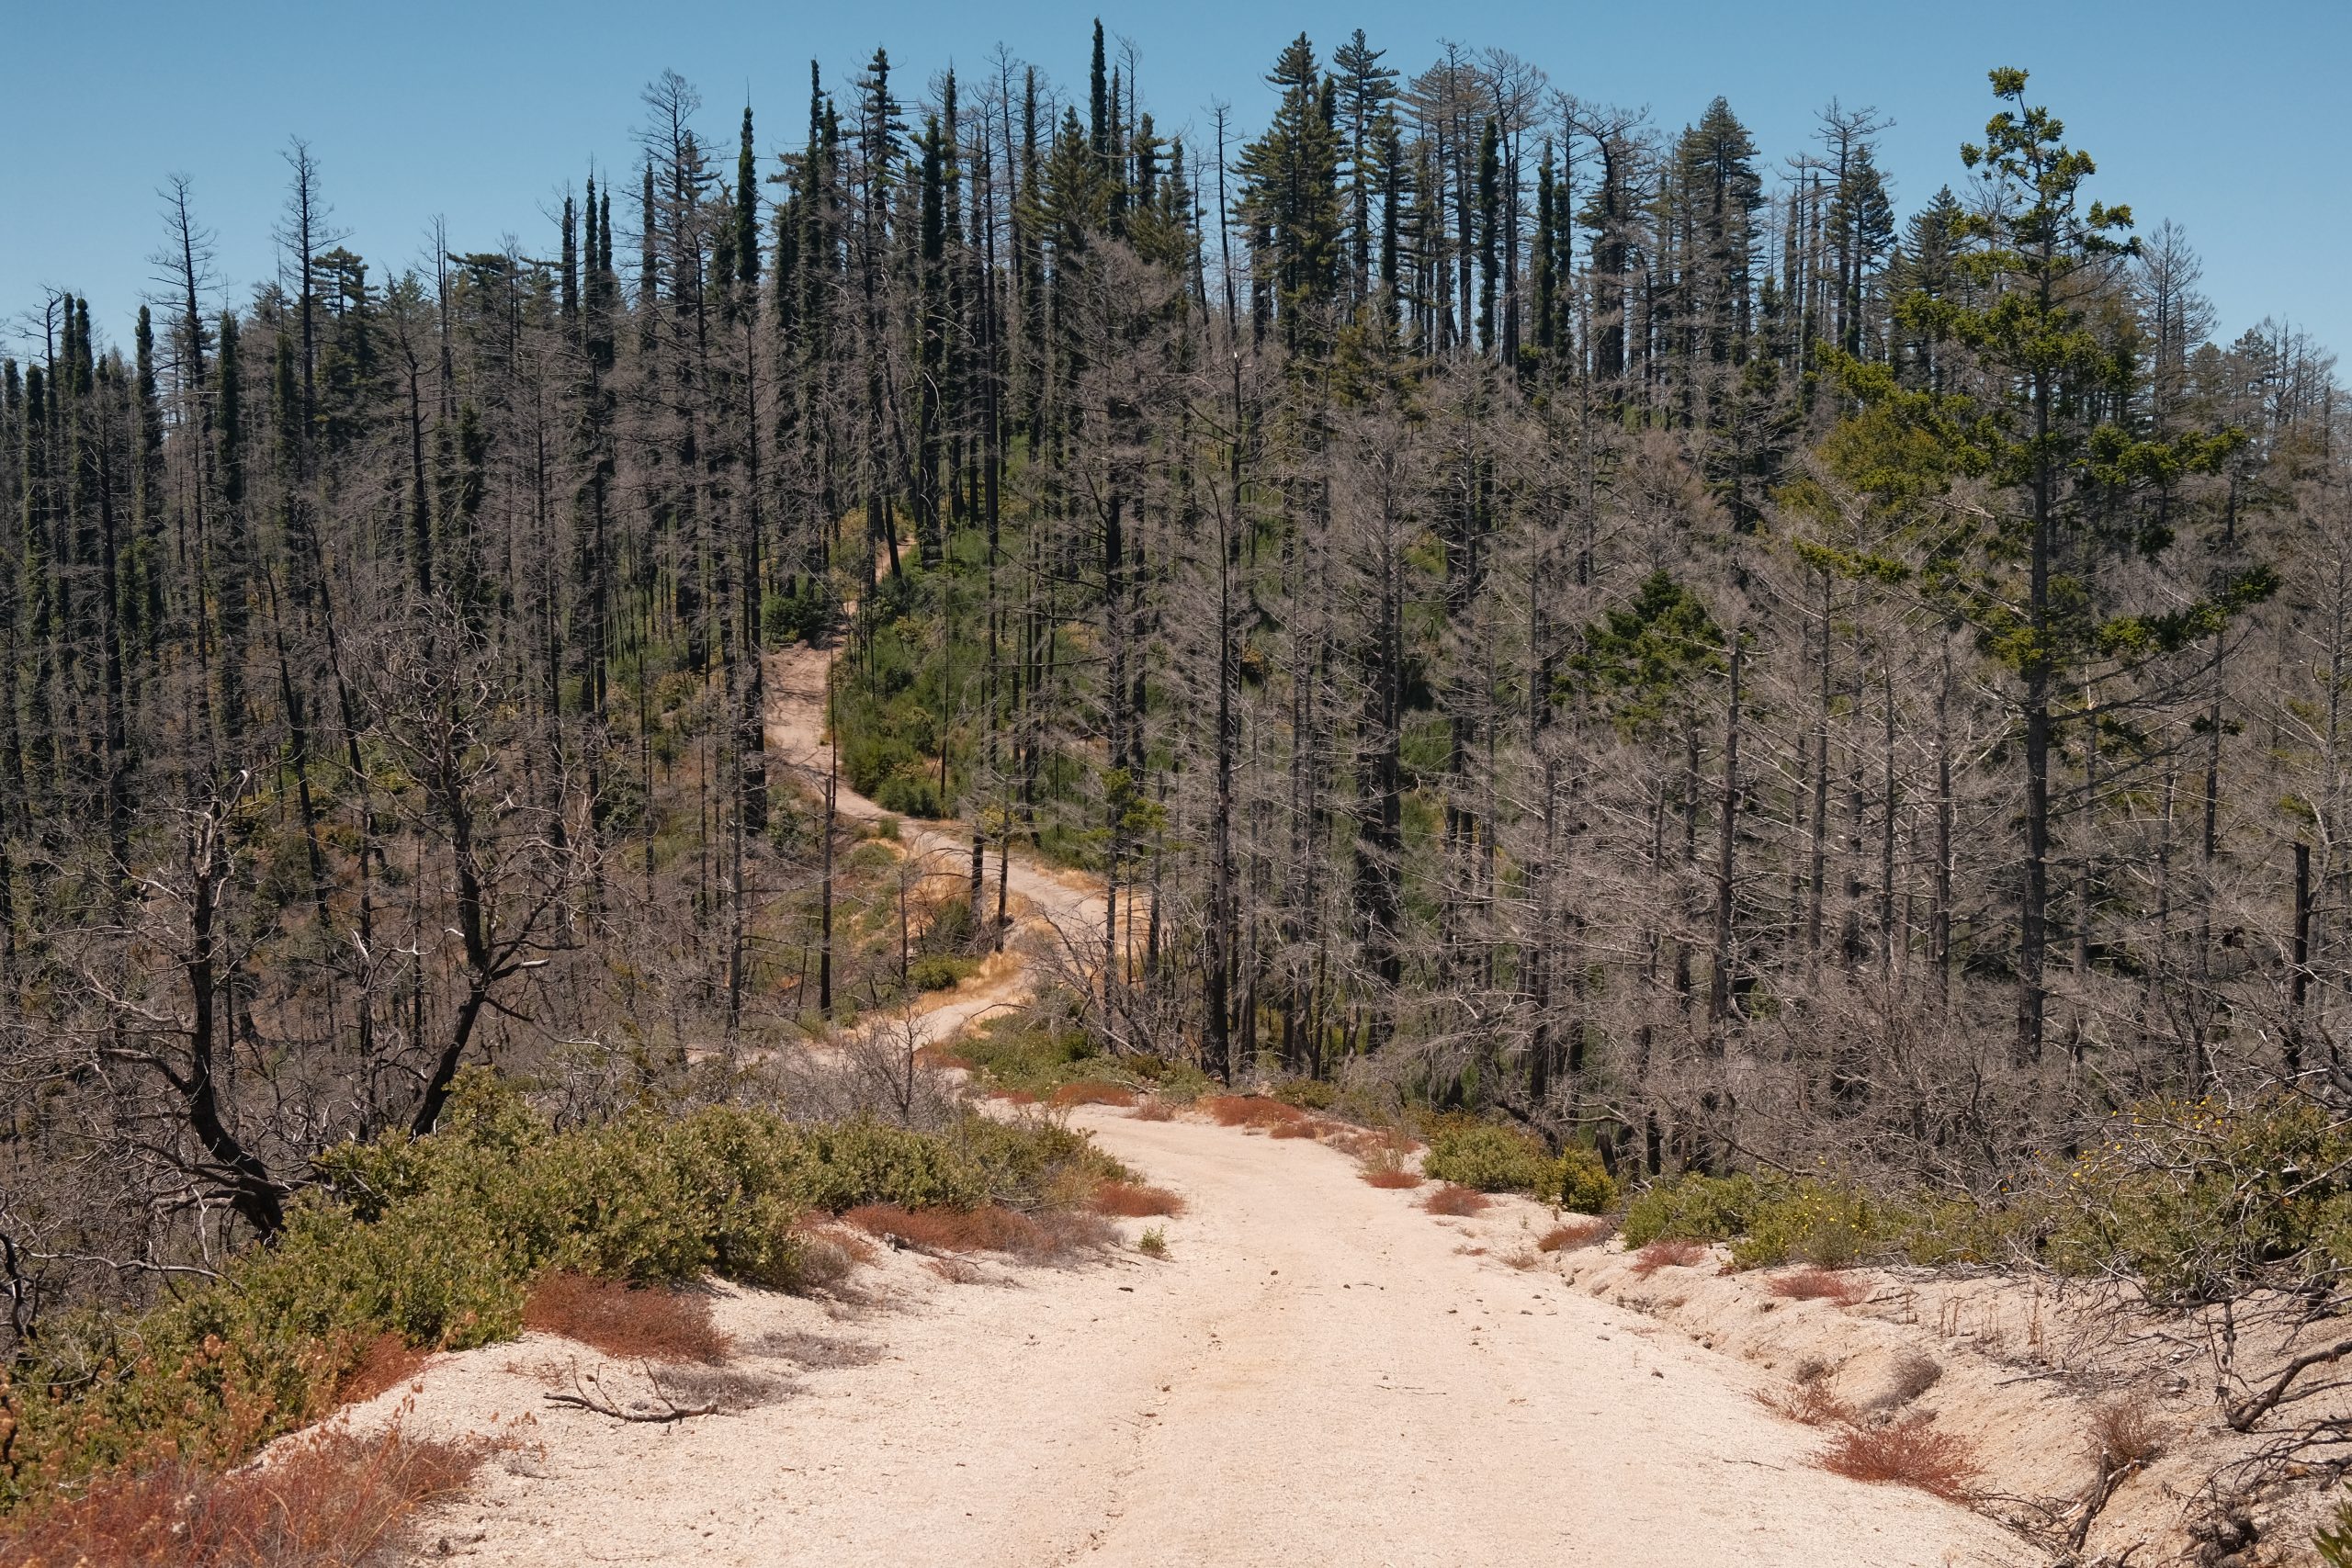 Photograph of trees with a dirt road through the middle, some of the trees are burnt and some are alive.